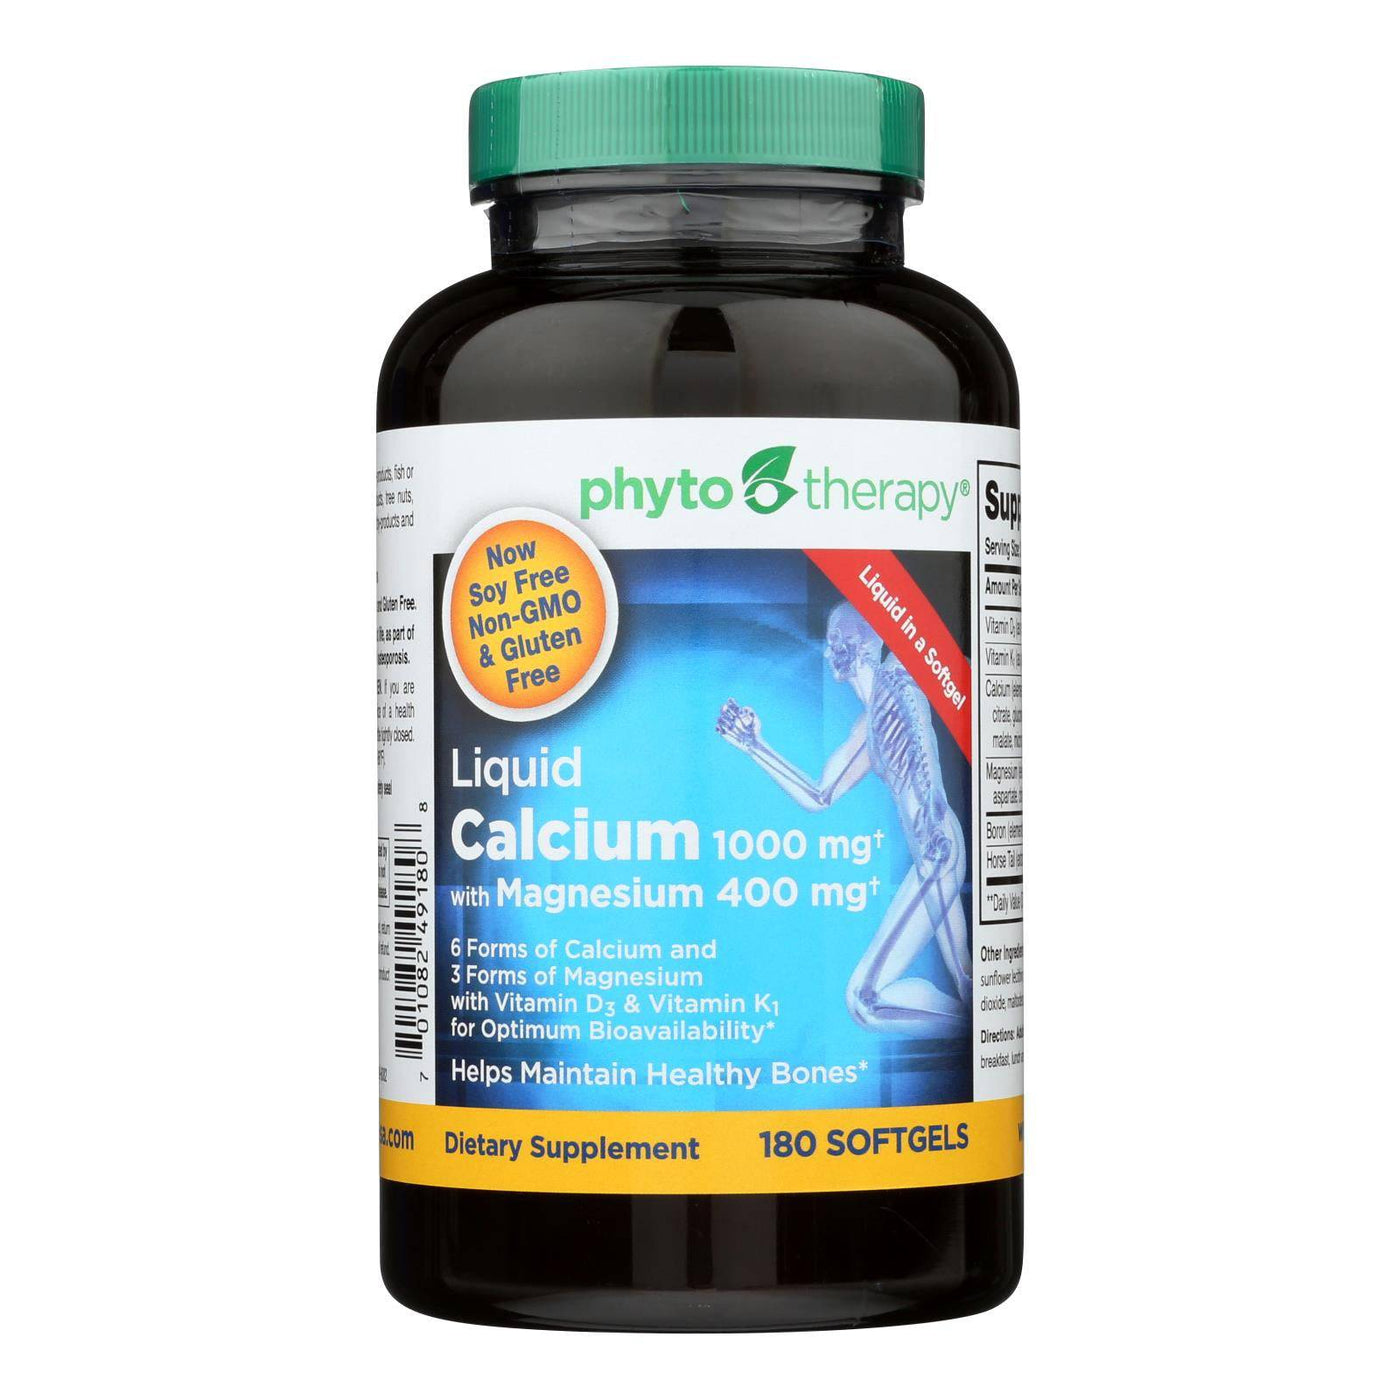 Buy Phyto-therapy Liquid Calcium With Magnesium - 1000 Mg - 180 Softgels  at OnlyNaturals.us